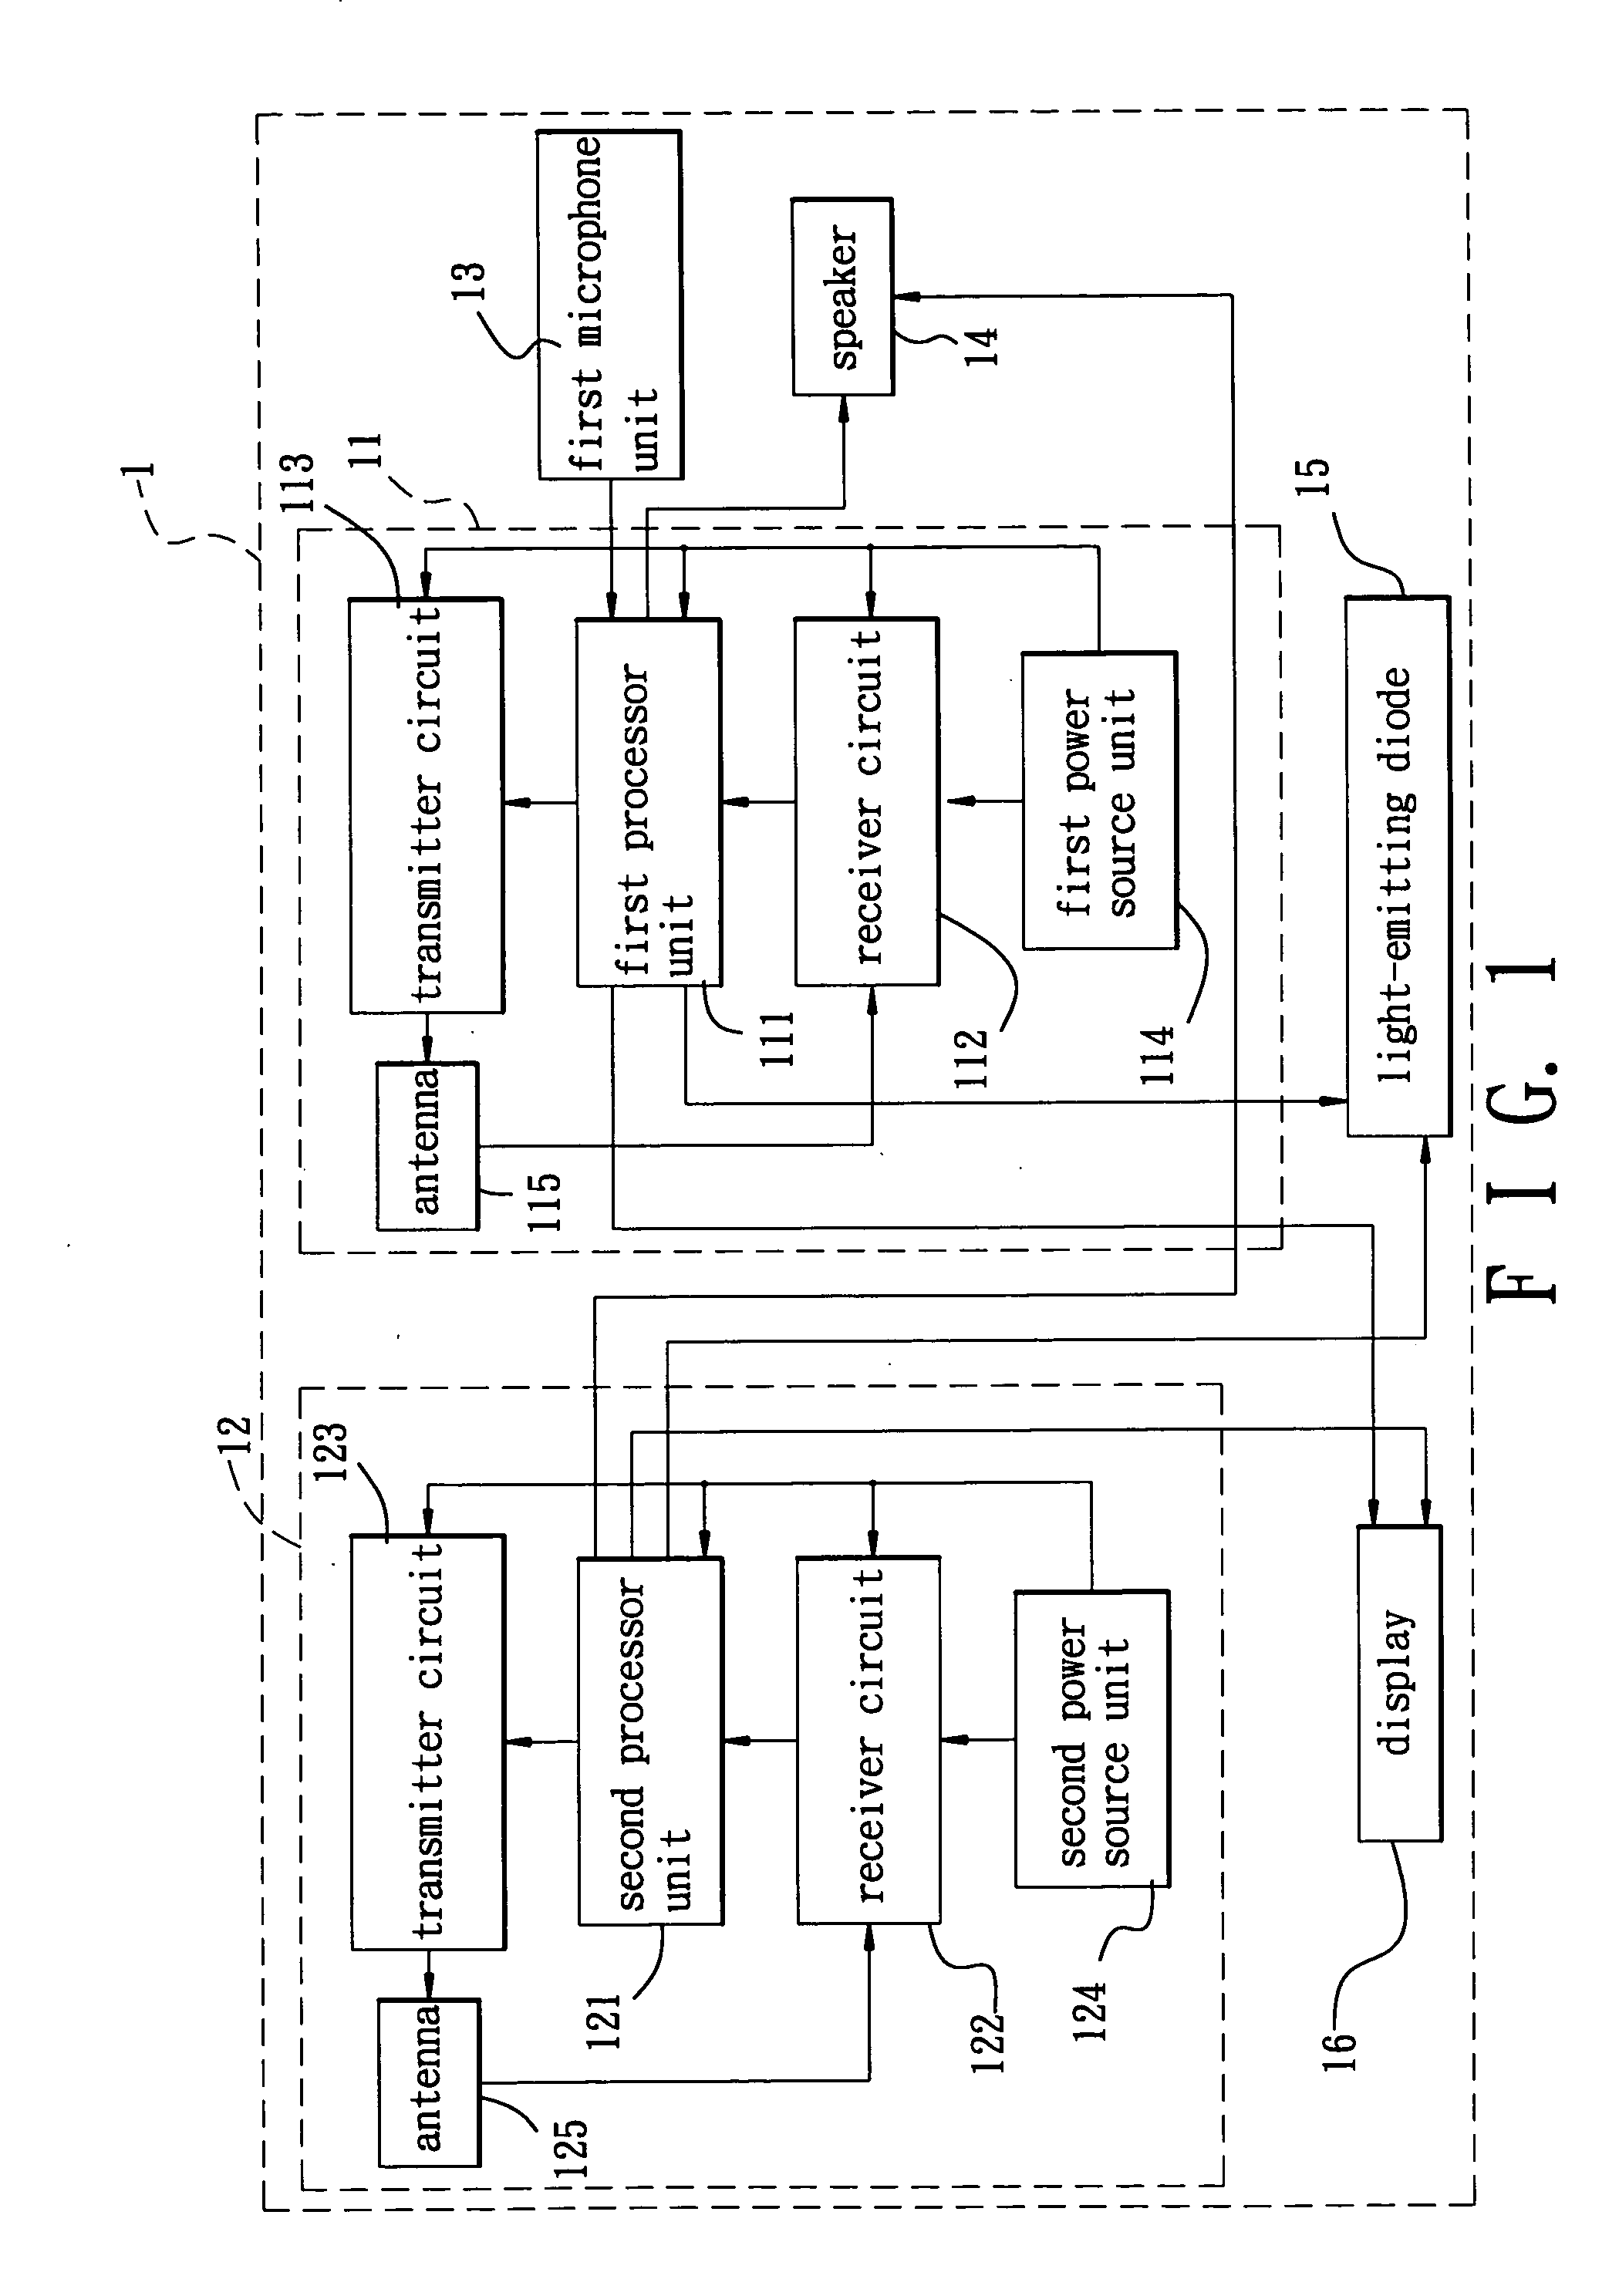 Tracking method and system to be implemented using a wireless telecommunications network